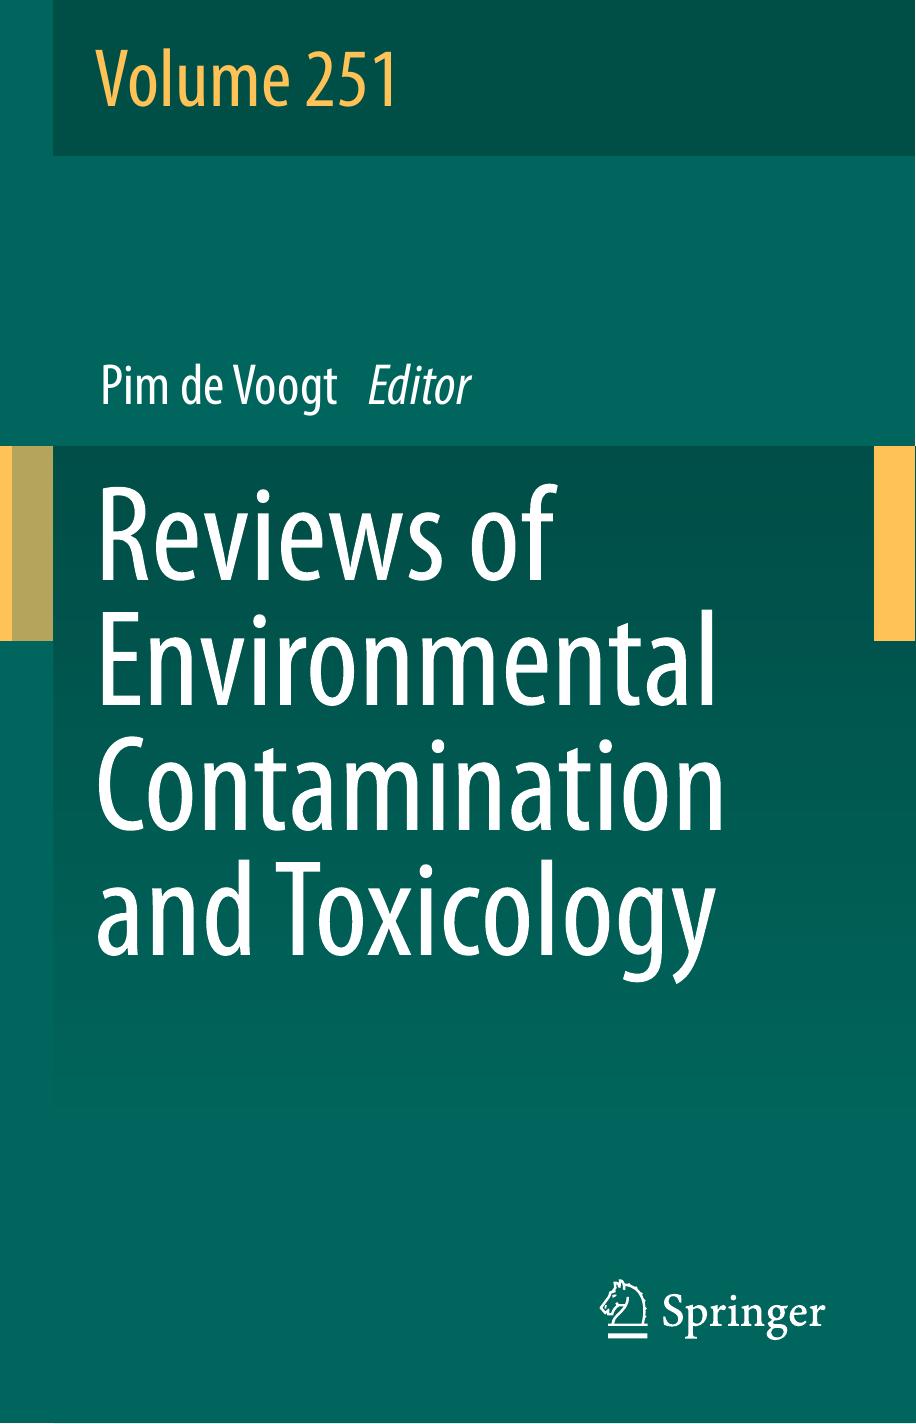 Reviews of Environmental Contamination and Toxicology Volume 251 by Pim de Voogt